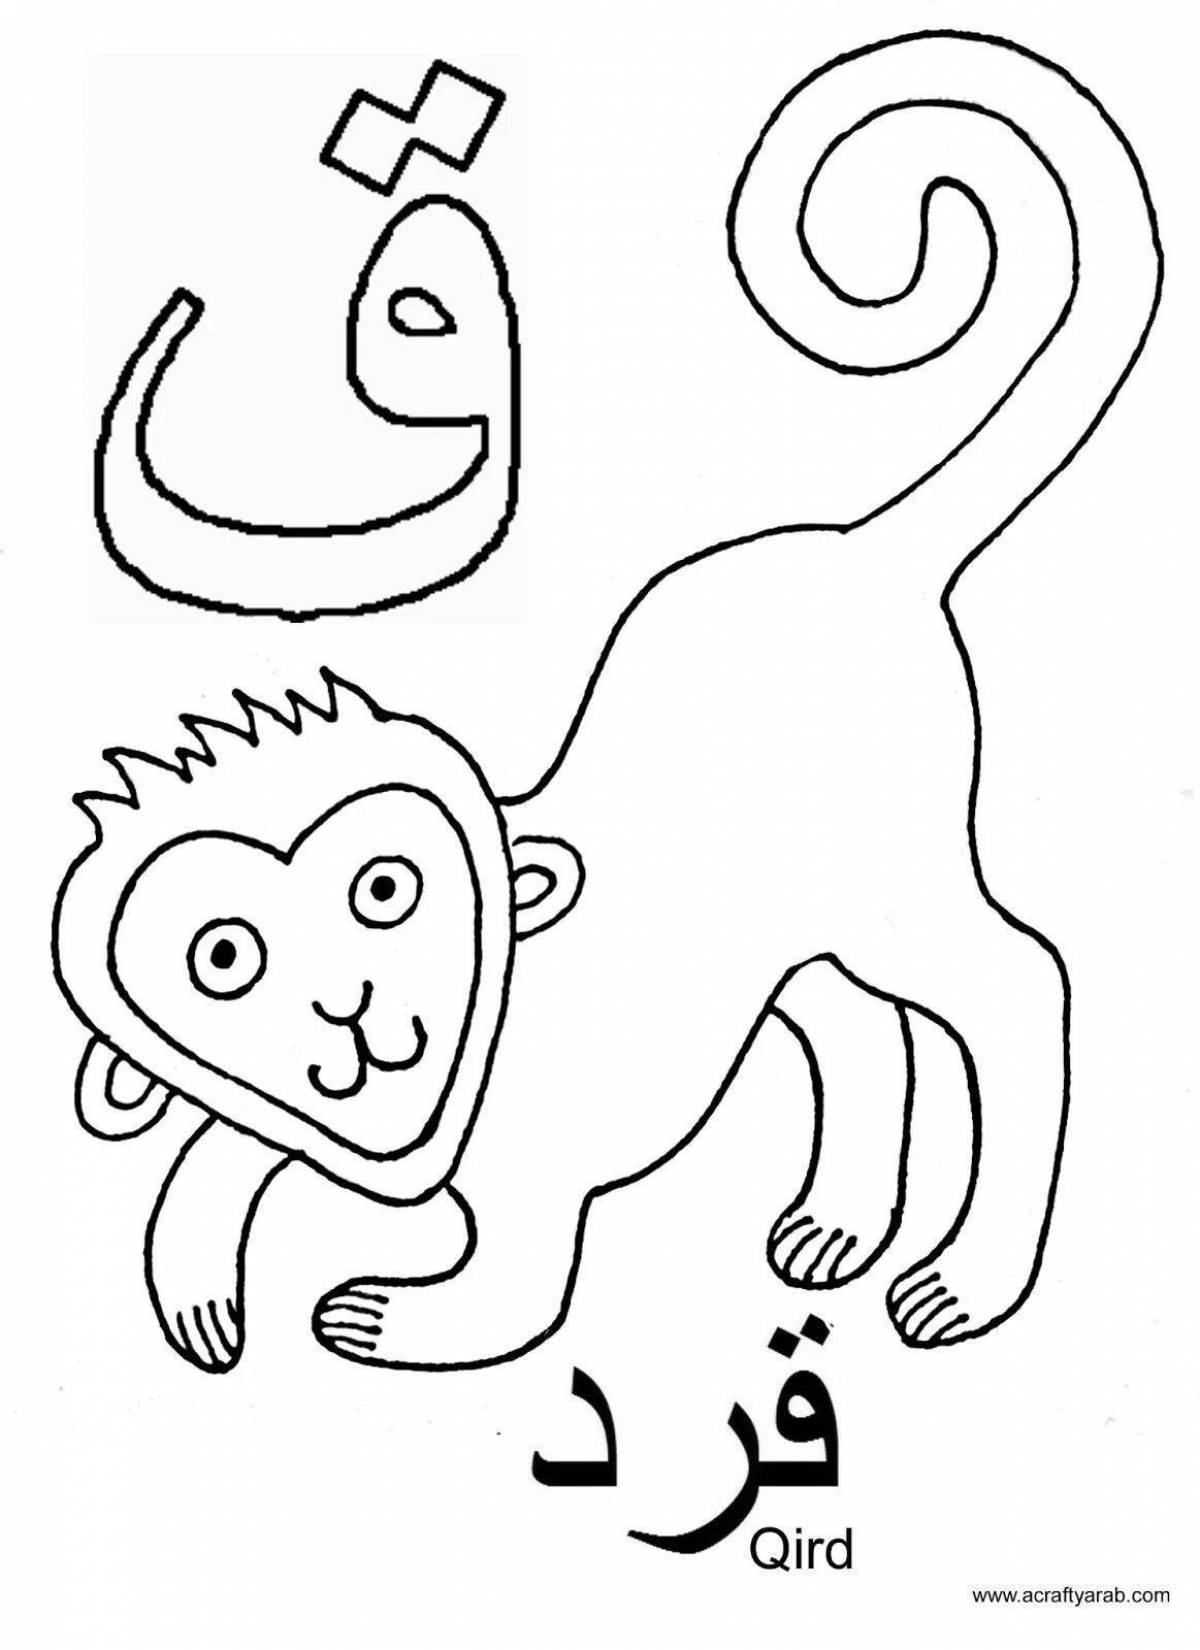 Colorful Arabic alphabet coloring page for beginners